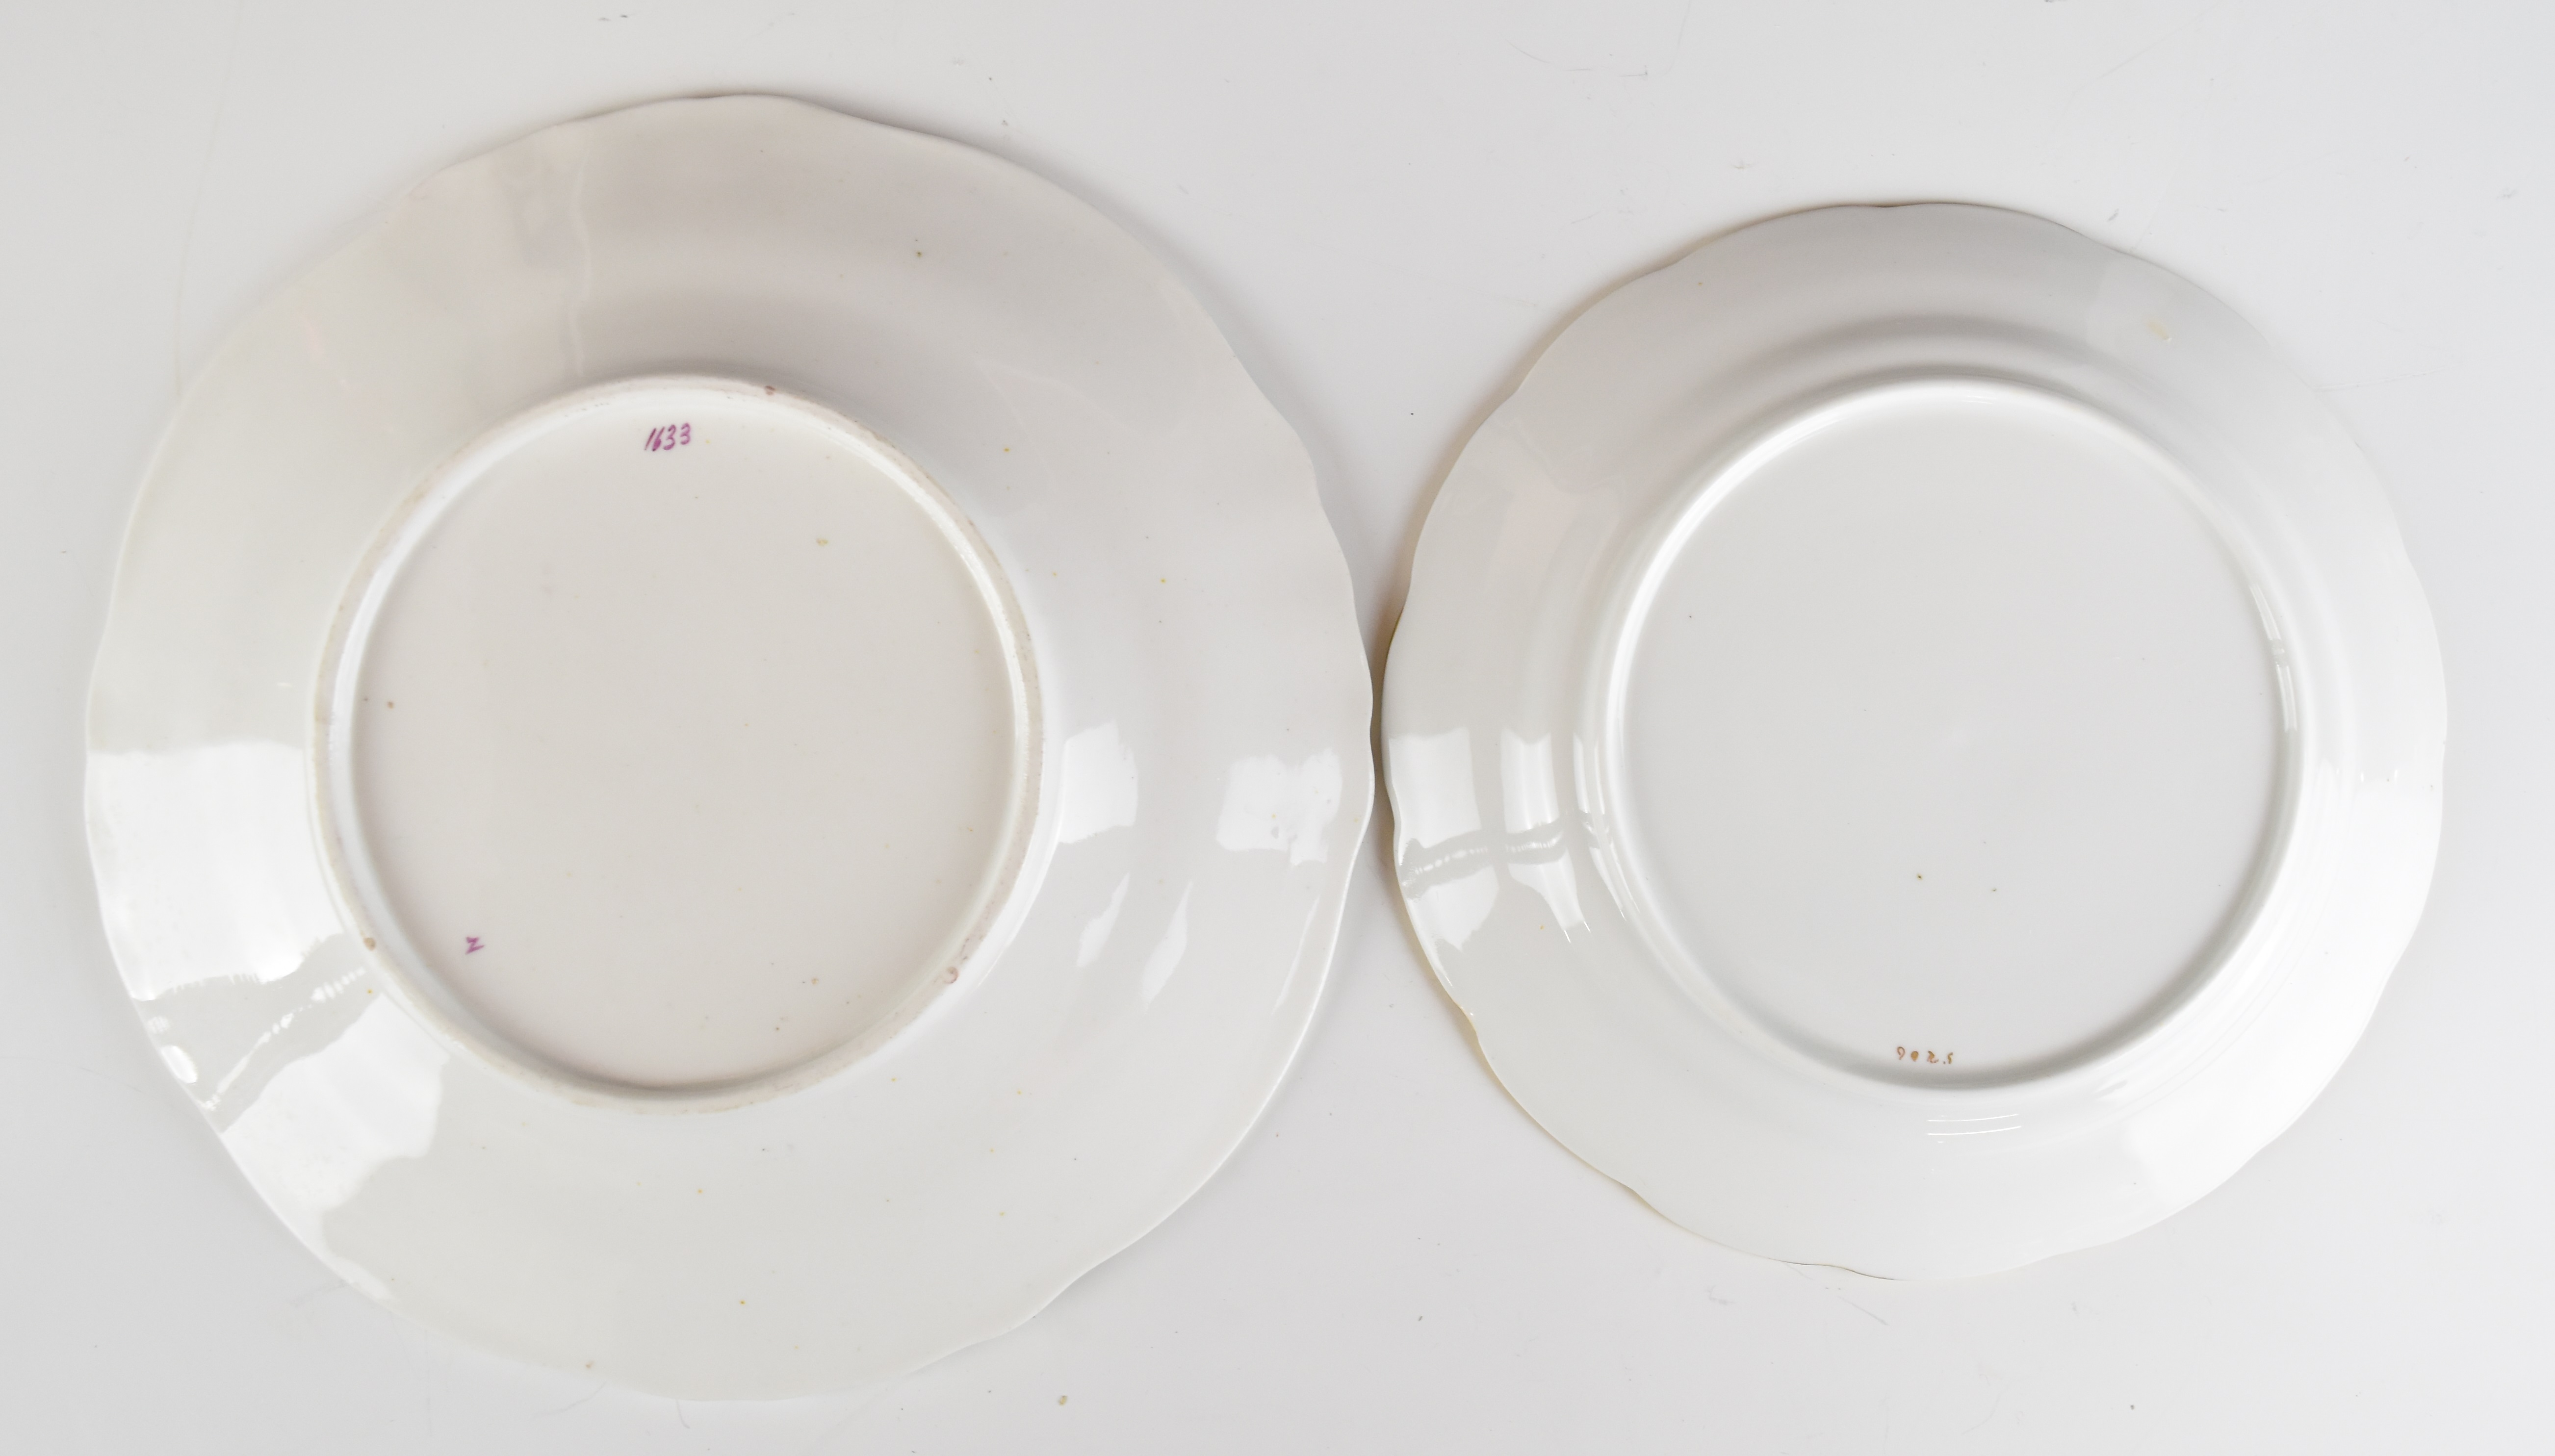 19thC cabinet plates and dishes including Copeland and Garrett, Yates, Flight Barr and Barr plates - Image 7 of 11